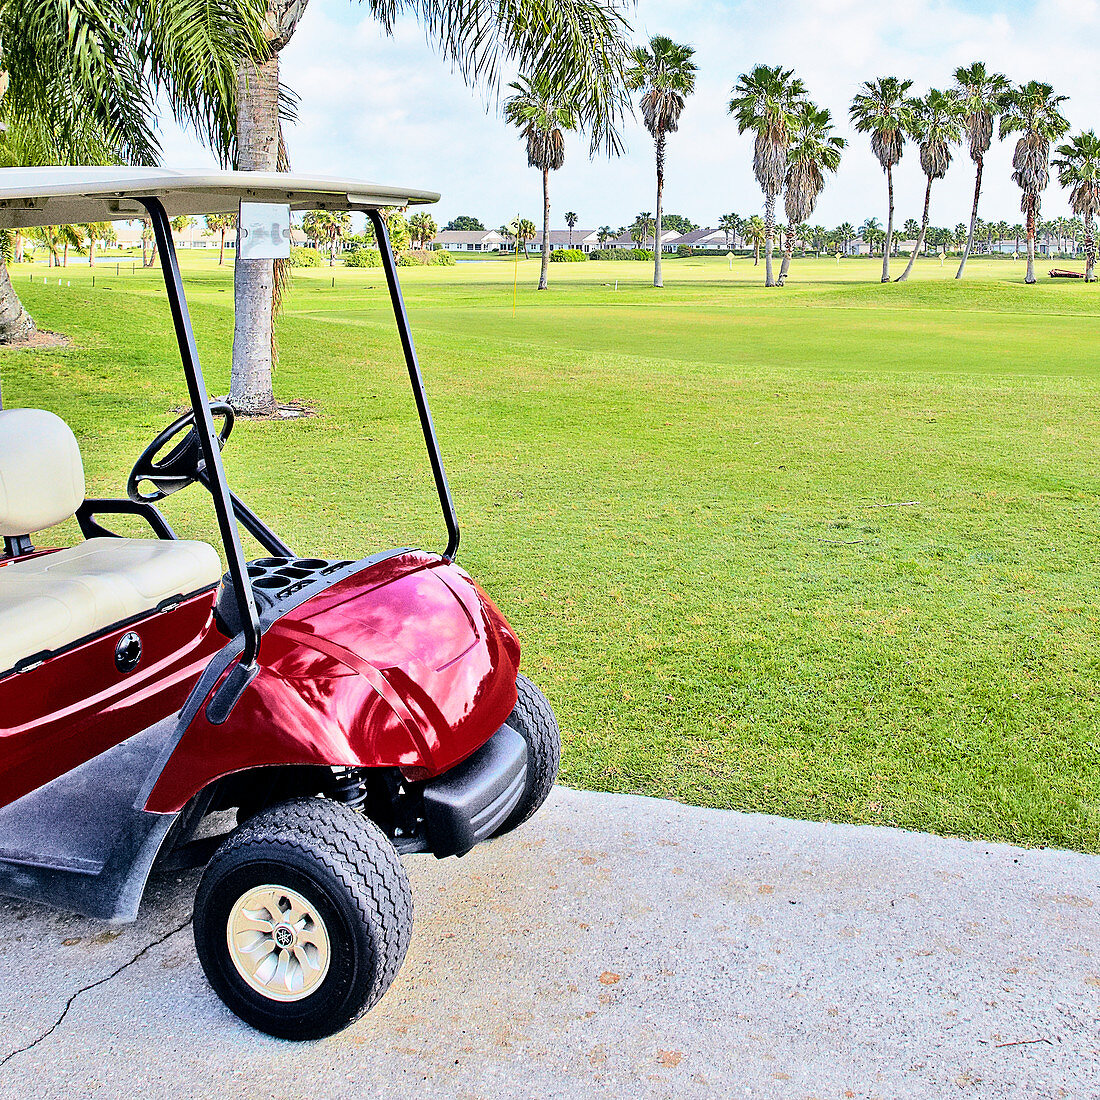 Golf buggy with palm trees on golf course.